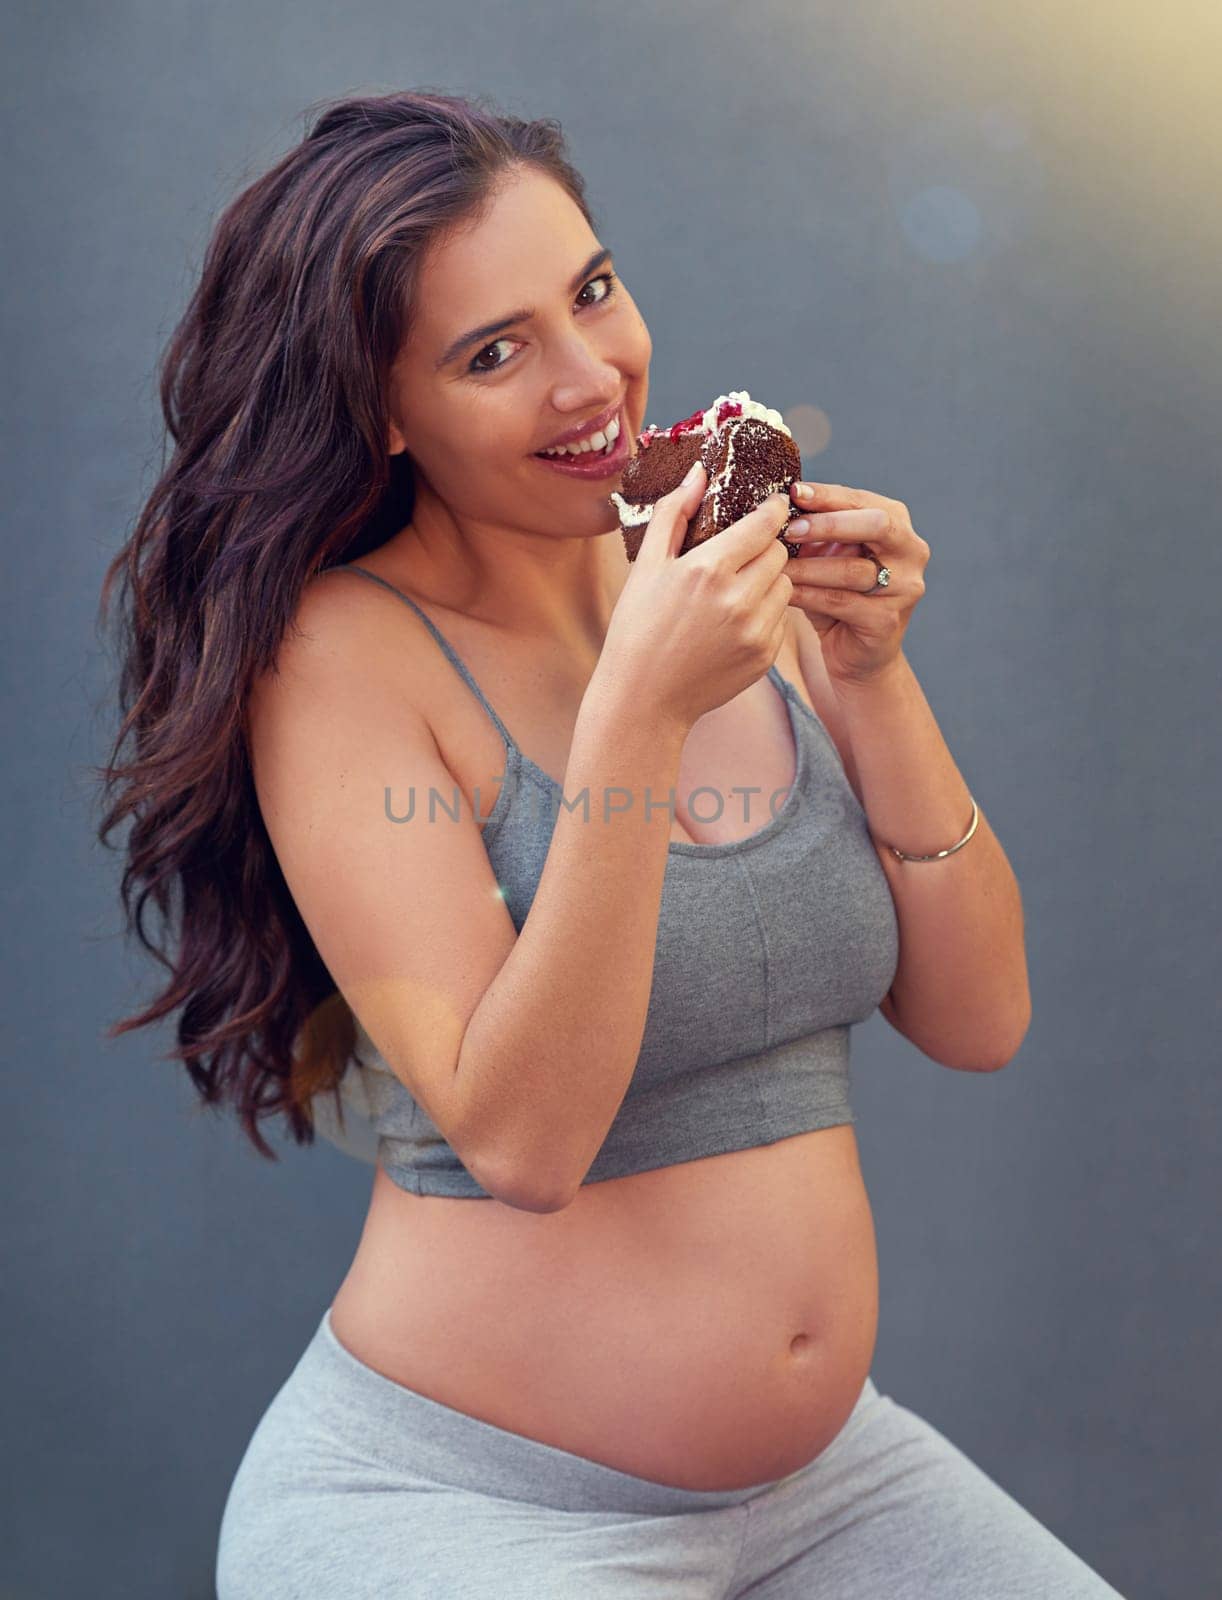 Pregnant woman, cake and portrait in studio for craving dessert, maternity and prenatal overeating in pregnancy. Mother, smile and belly isolated with sweet confection for eat, sugar or treats.